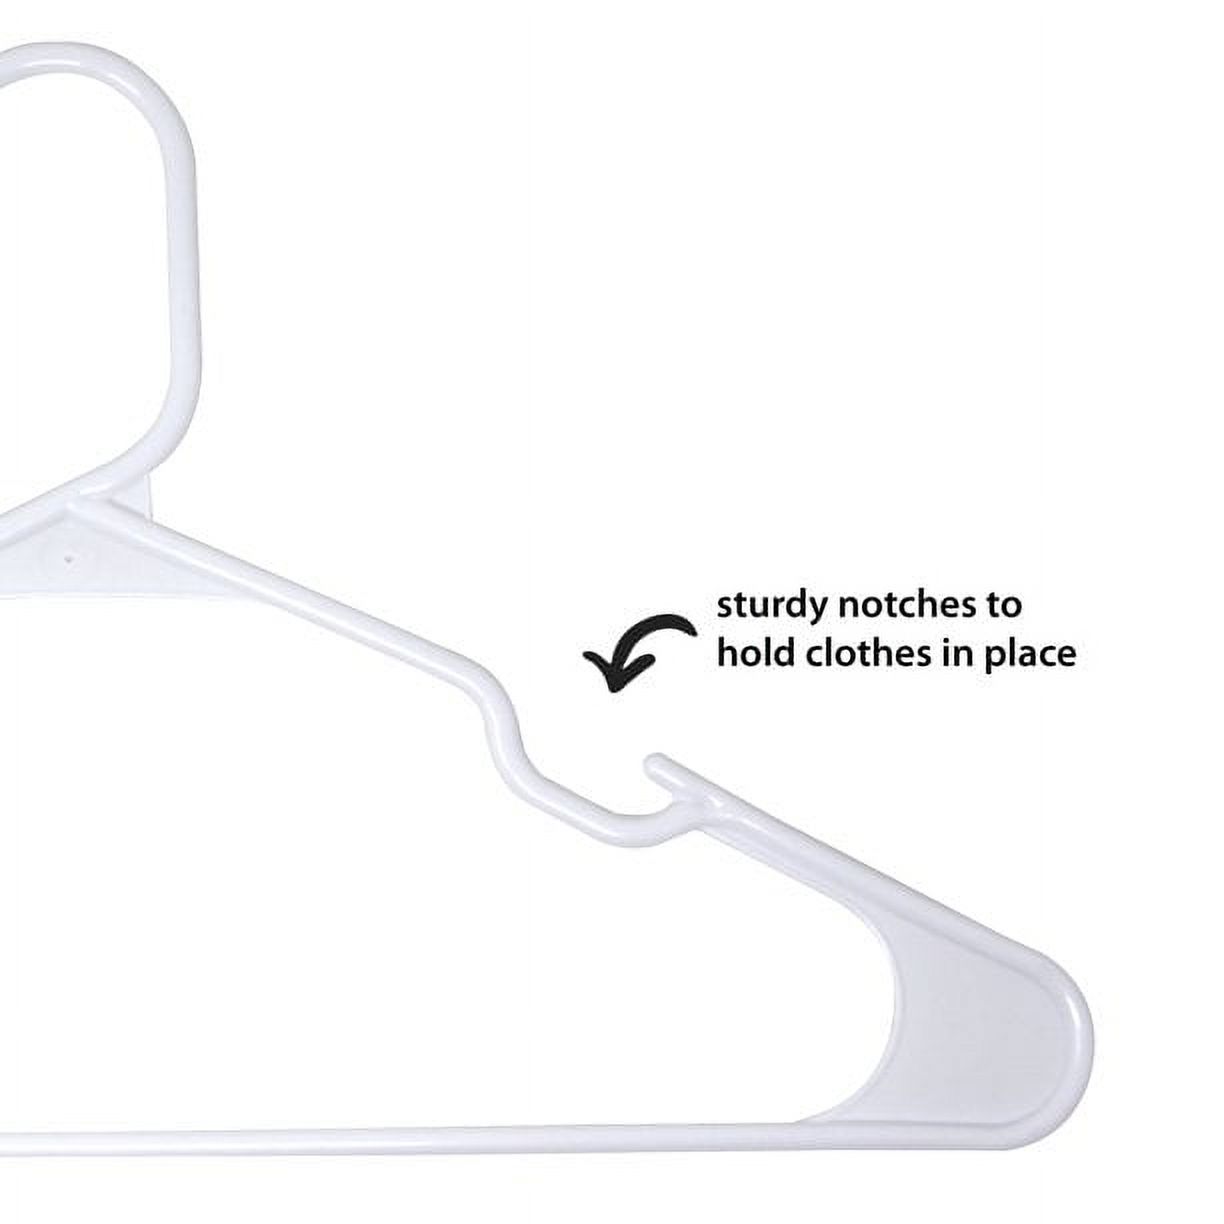 Mainstays Adult & Teen Clothing Hangers, 50 Pack, White, Durable Plastic - image 3 of 5